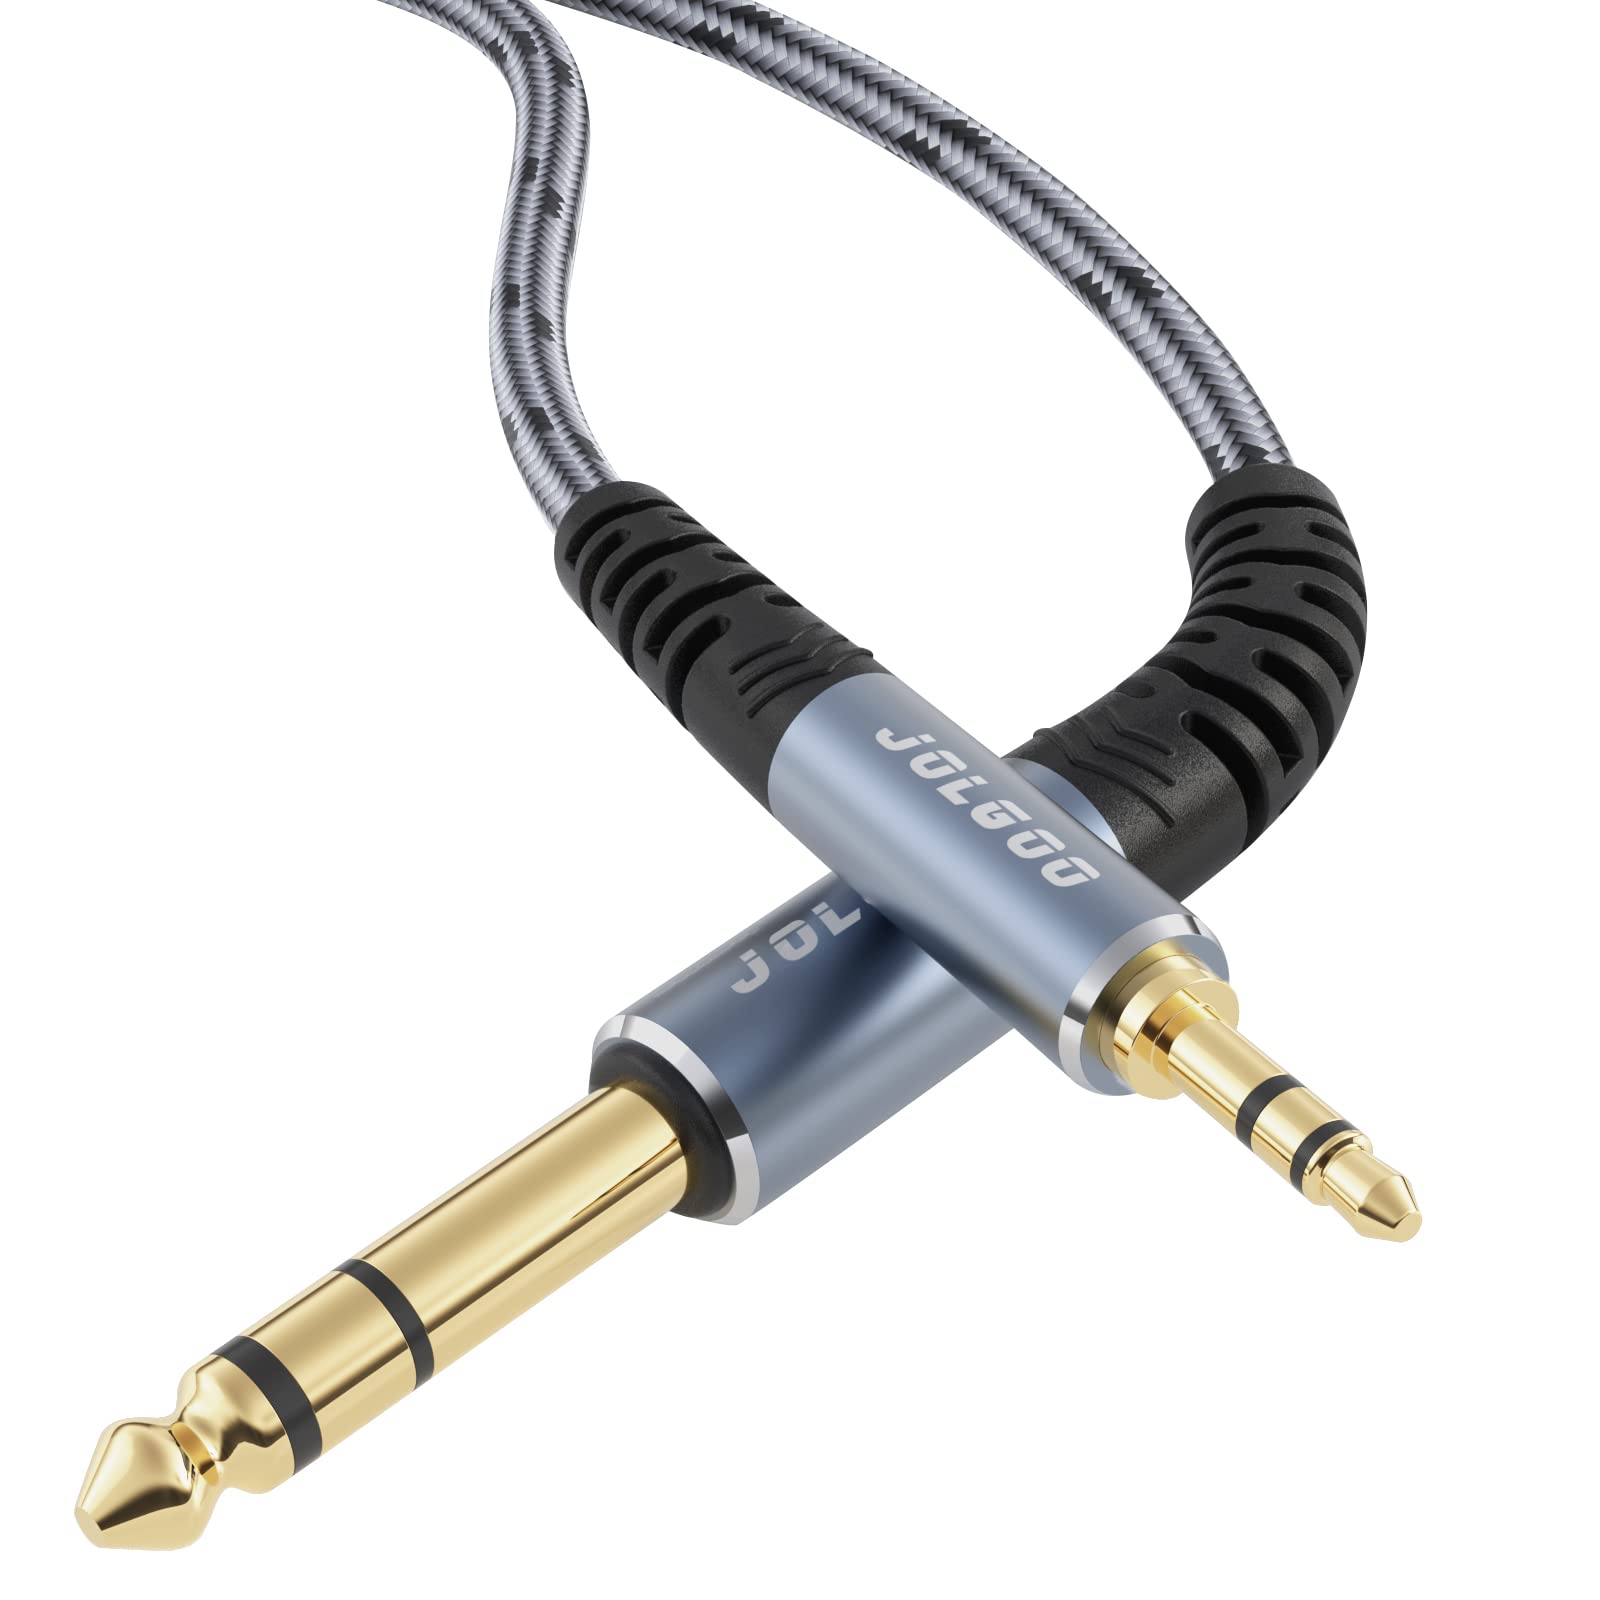 What Is A Trs Audio Cable